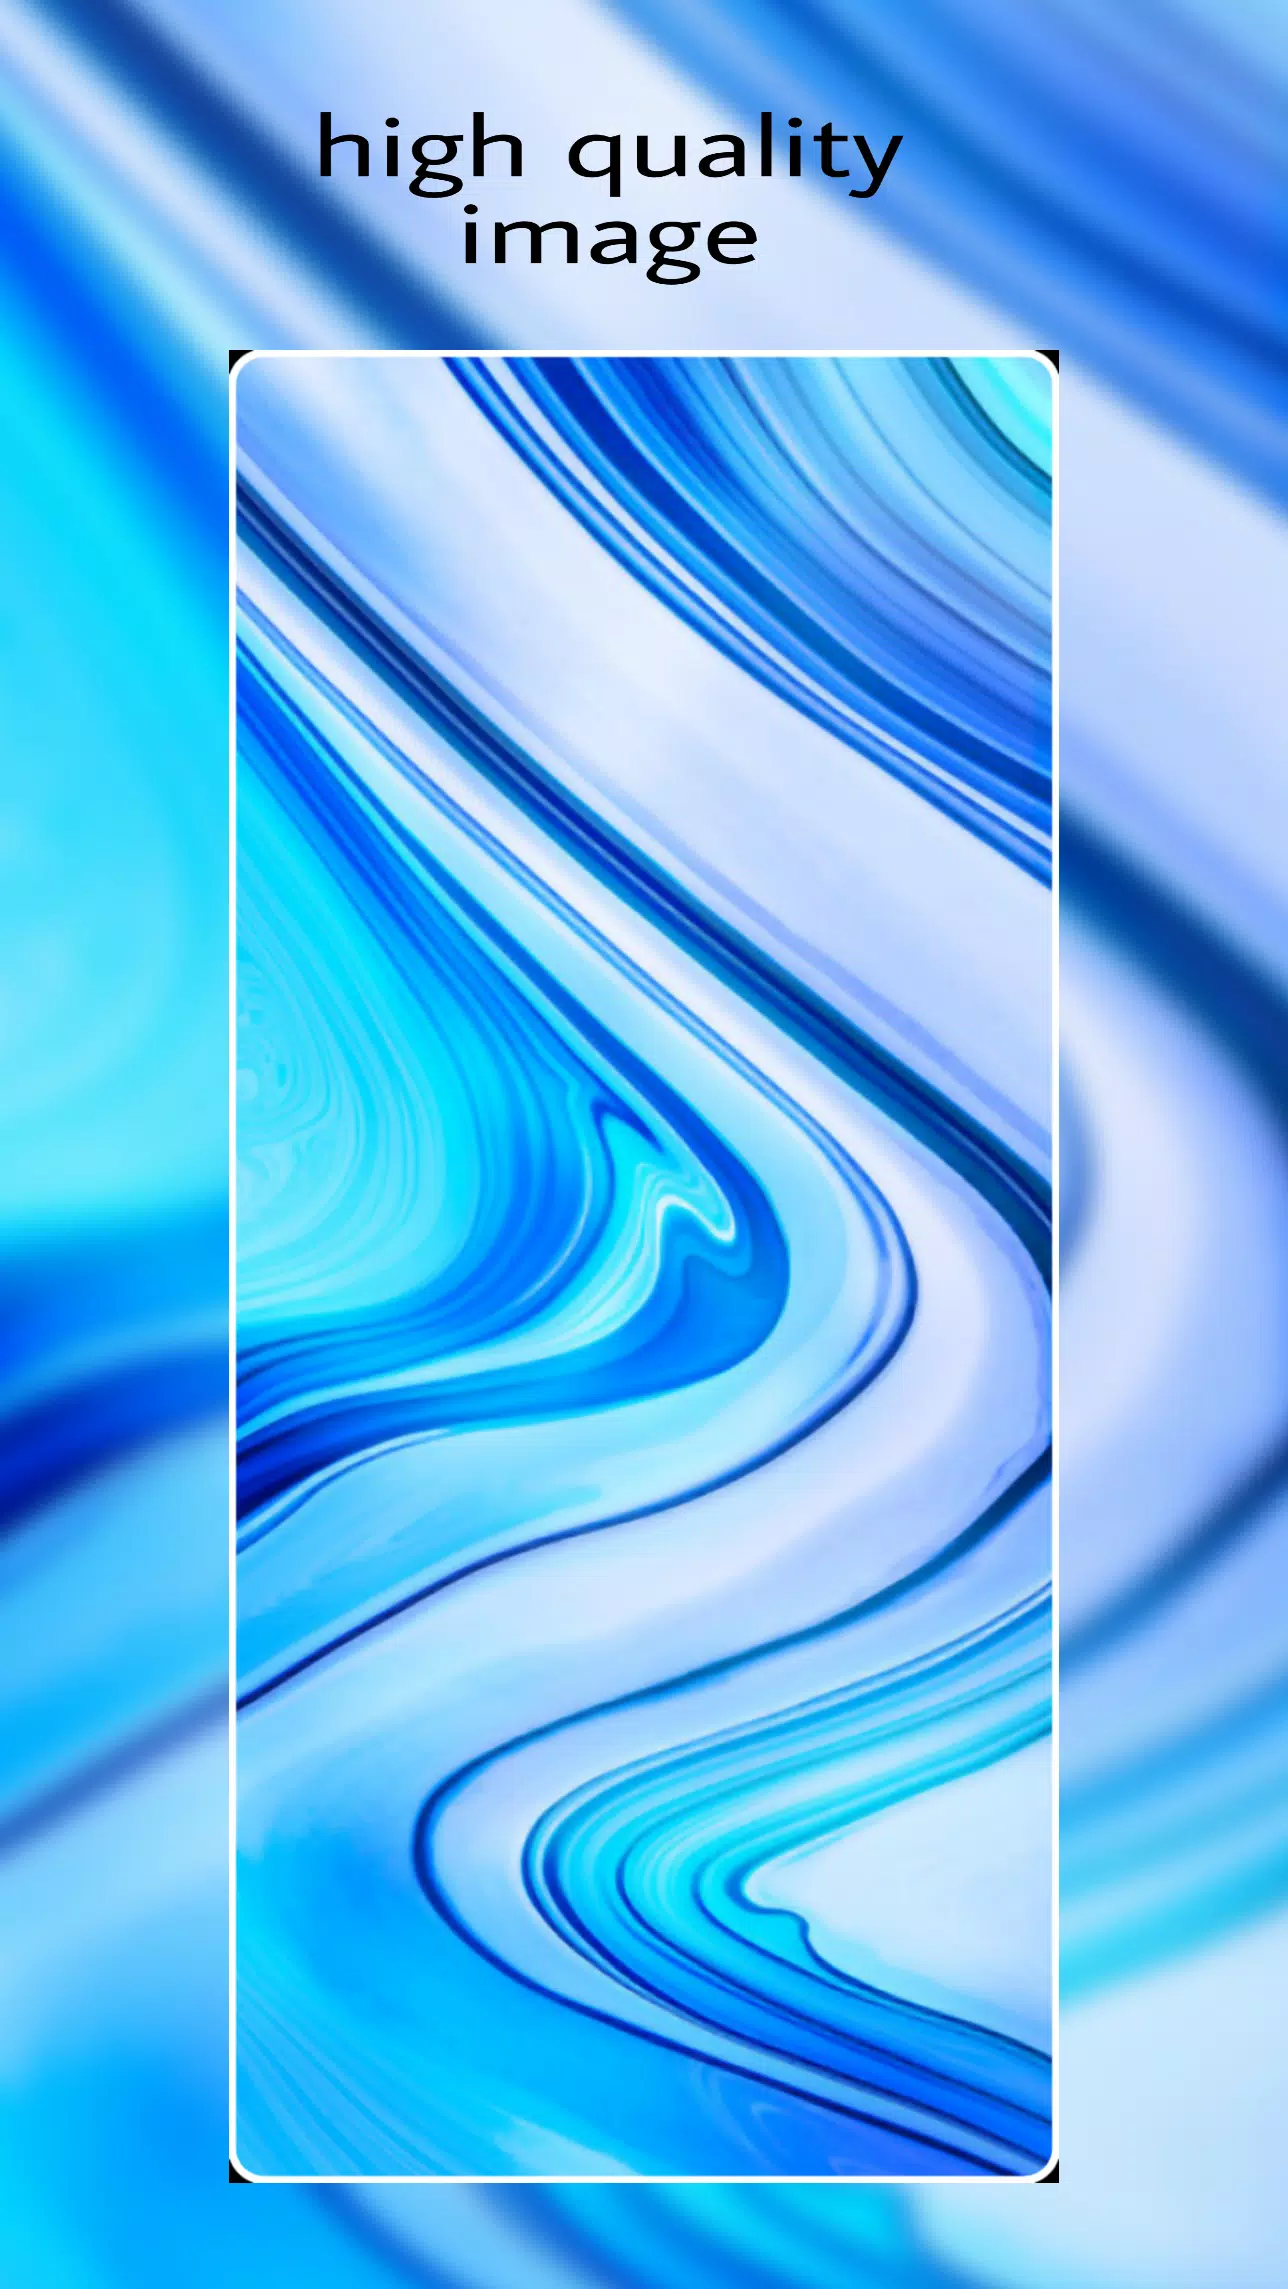 Wallpaper for Redmi note 9 pro | Miui 12 APK for Android Download